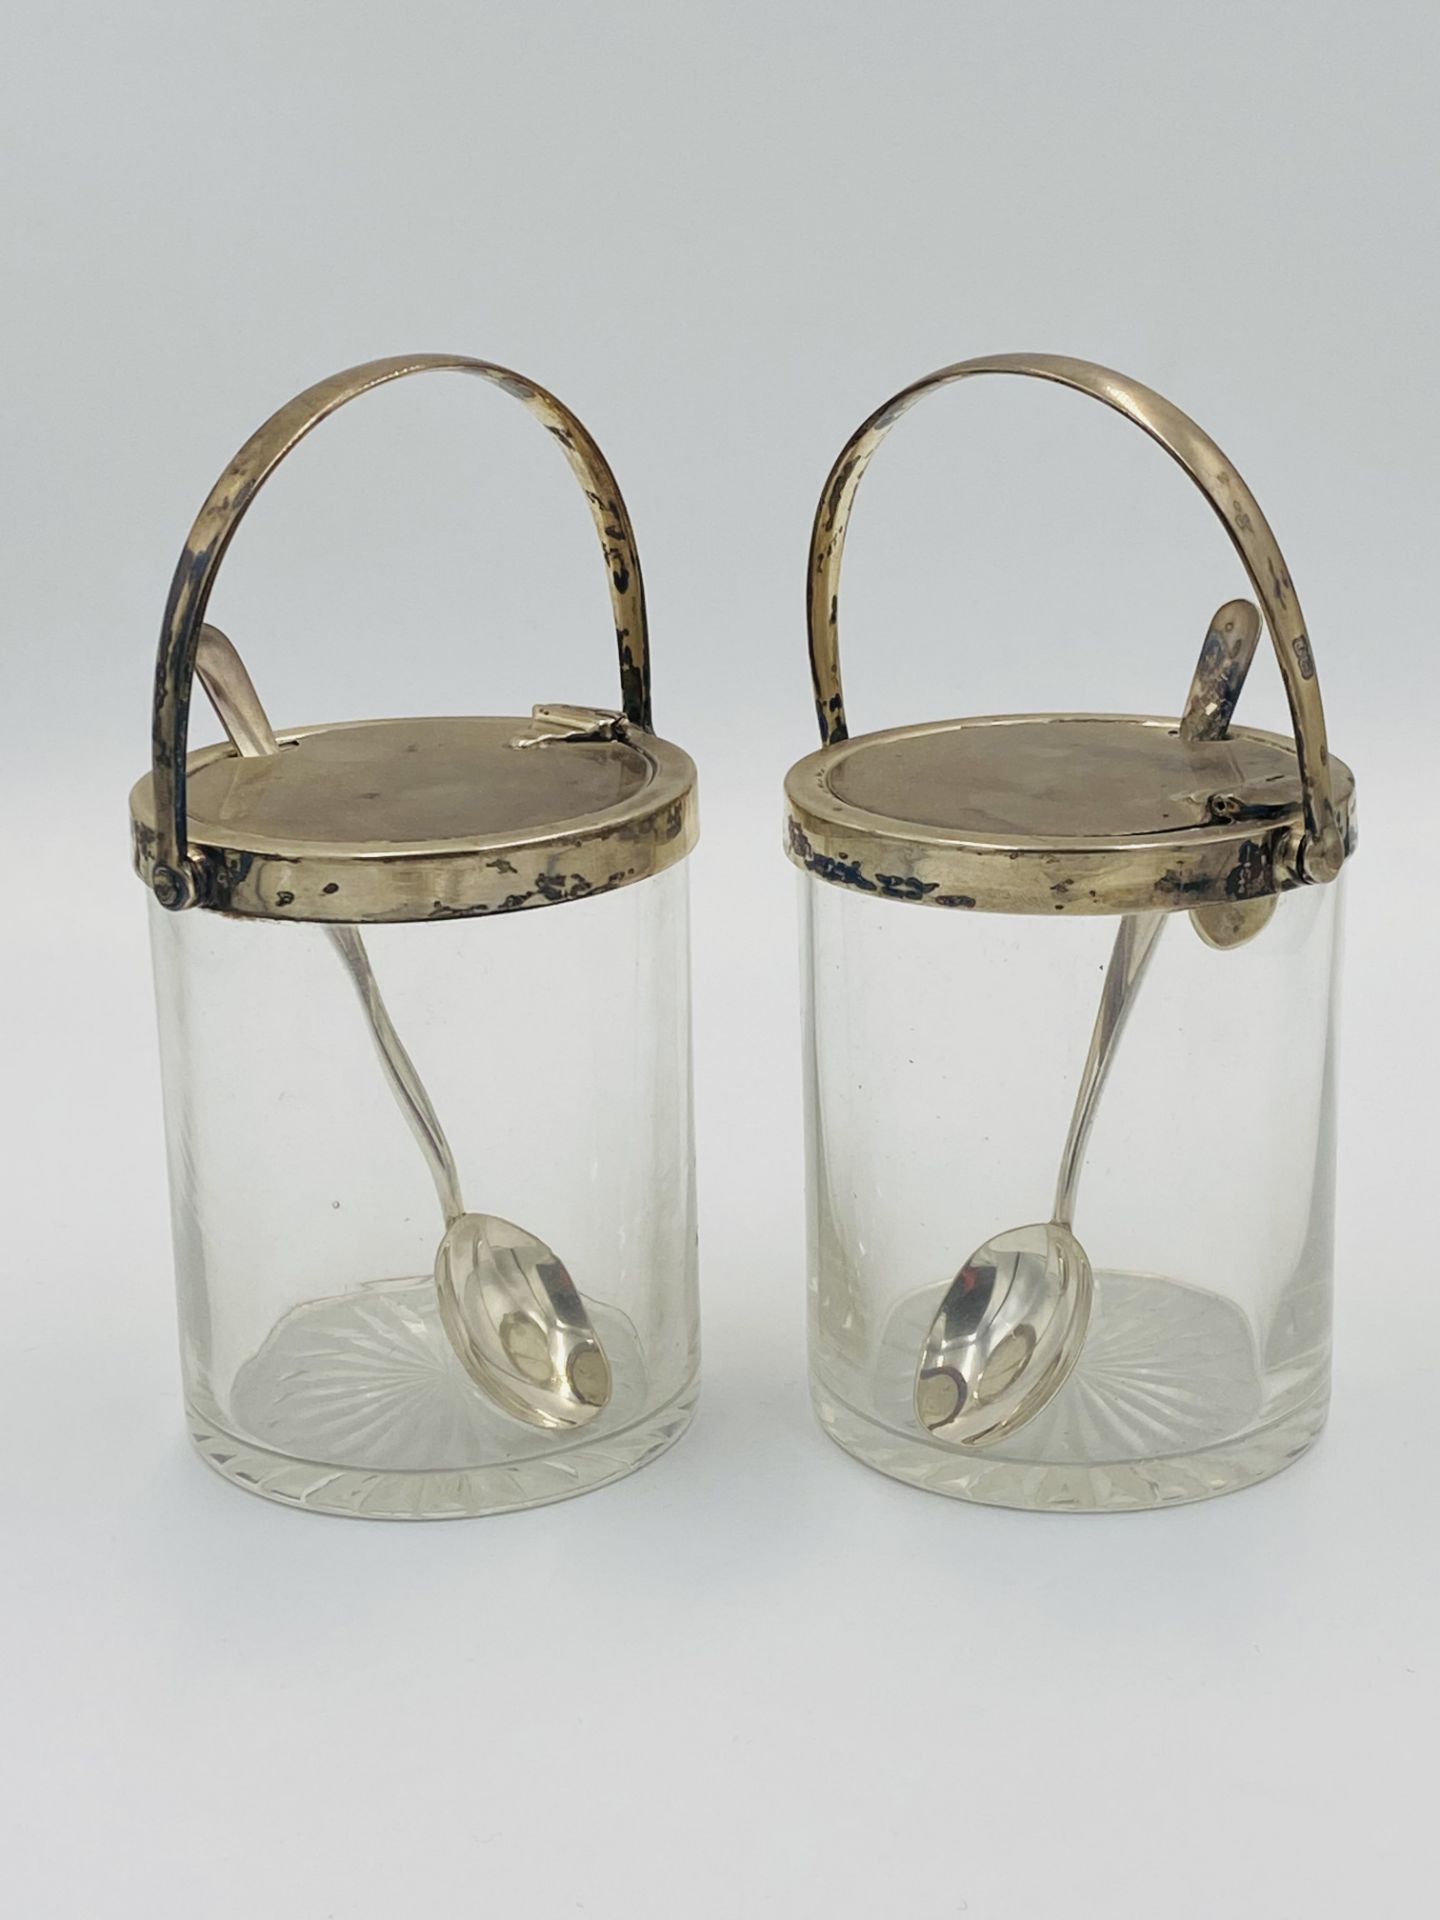 Pair of silver mounted, glass preserve jars with star cut bases - Image 2 of 6